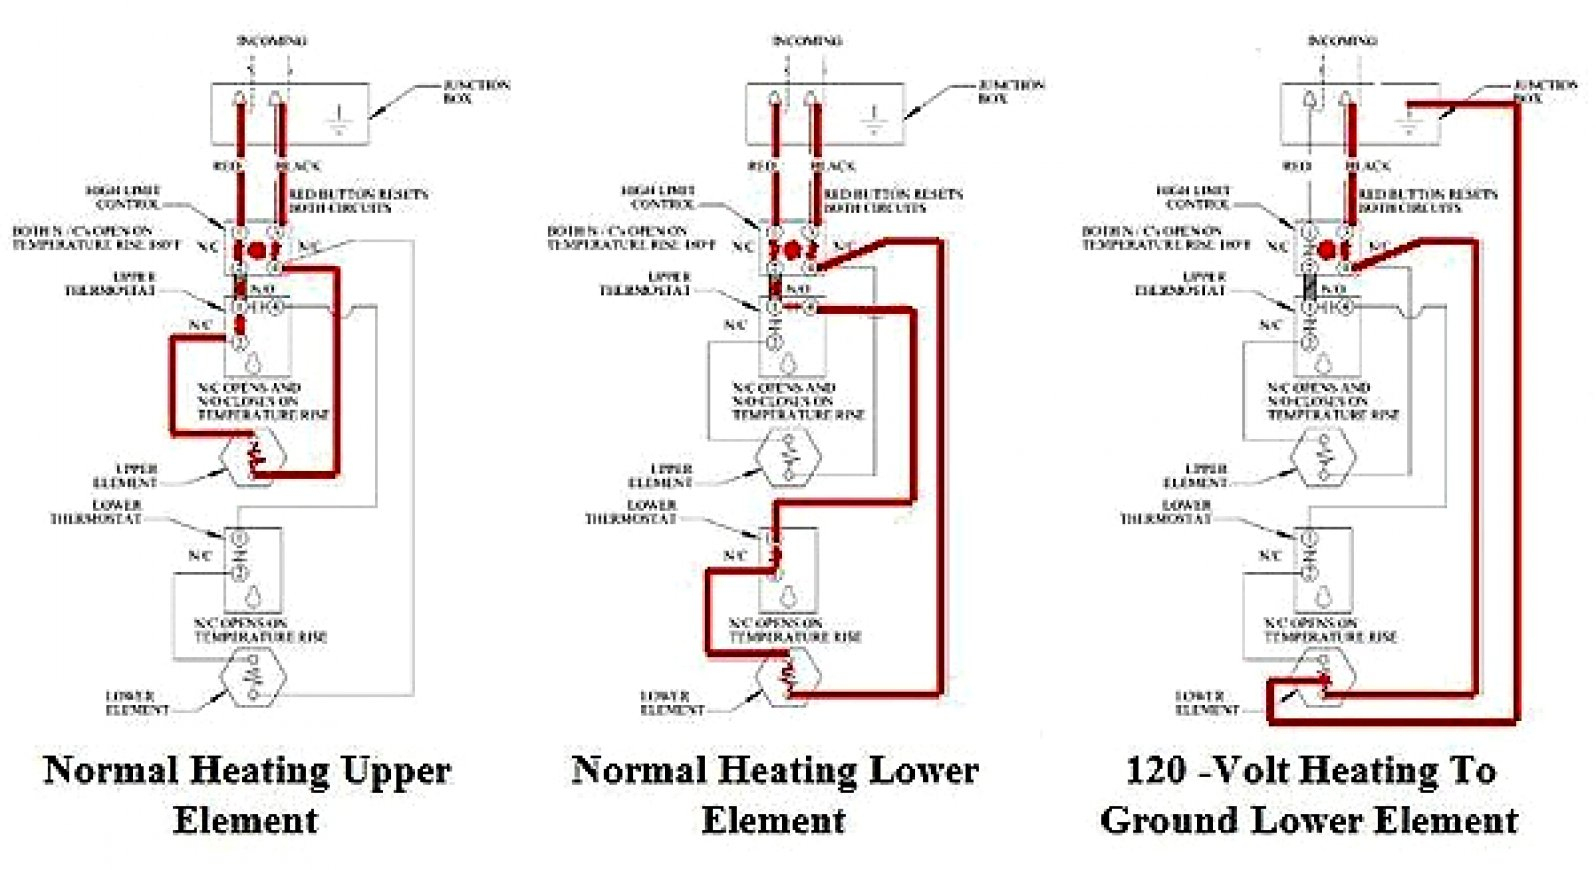 Electric Water Heater Thermostat Wiring Diagram | Wiring Diagram - Electric Water Heater Thermostat Wiring Diagram